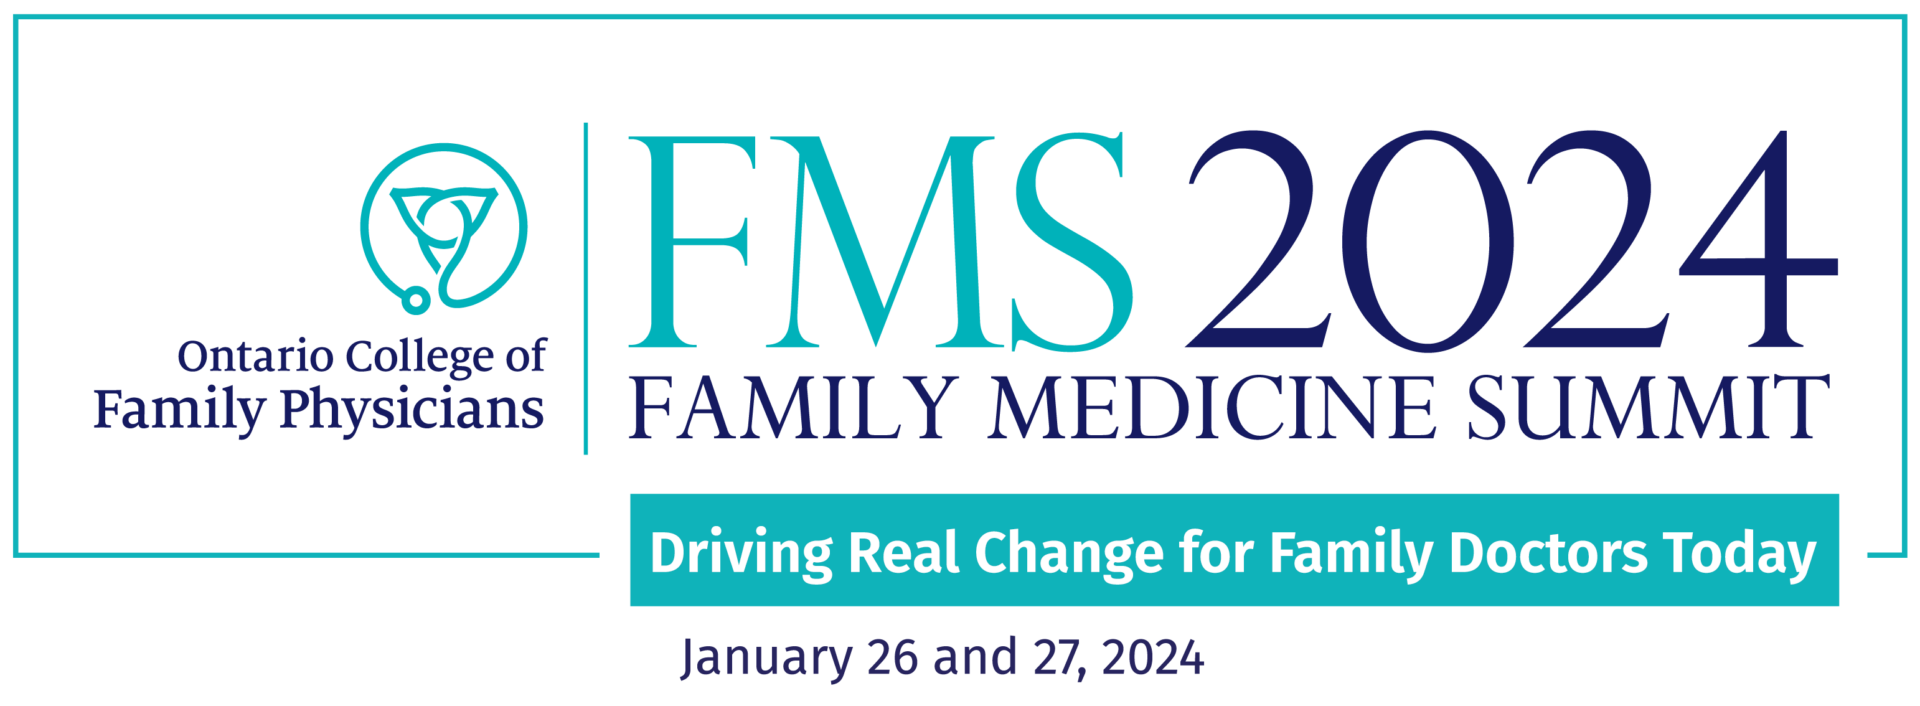 banner that reads: "Ontario College of Family Physicians: FMS 2024, Family Medicine Summit"